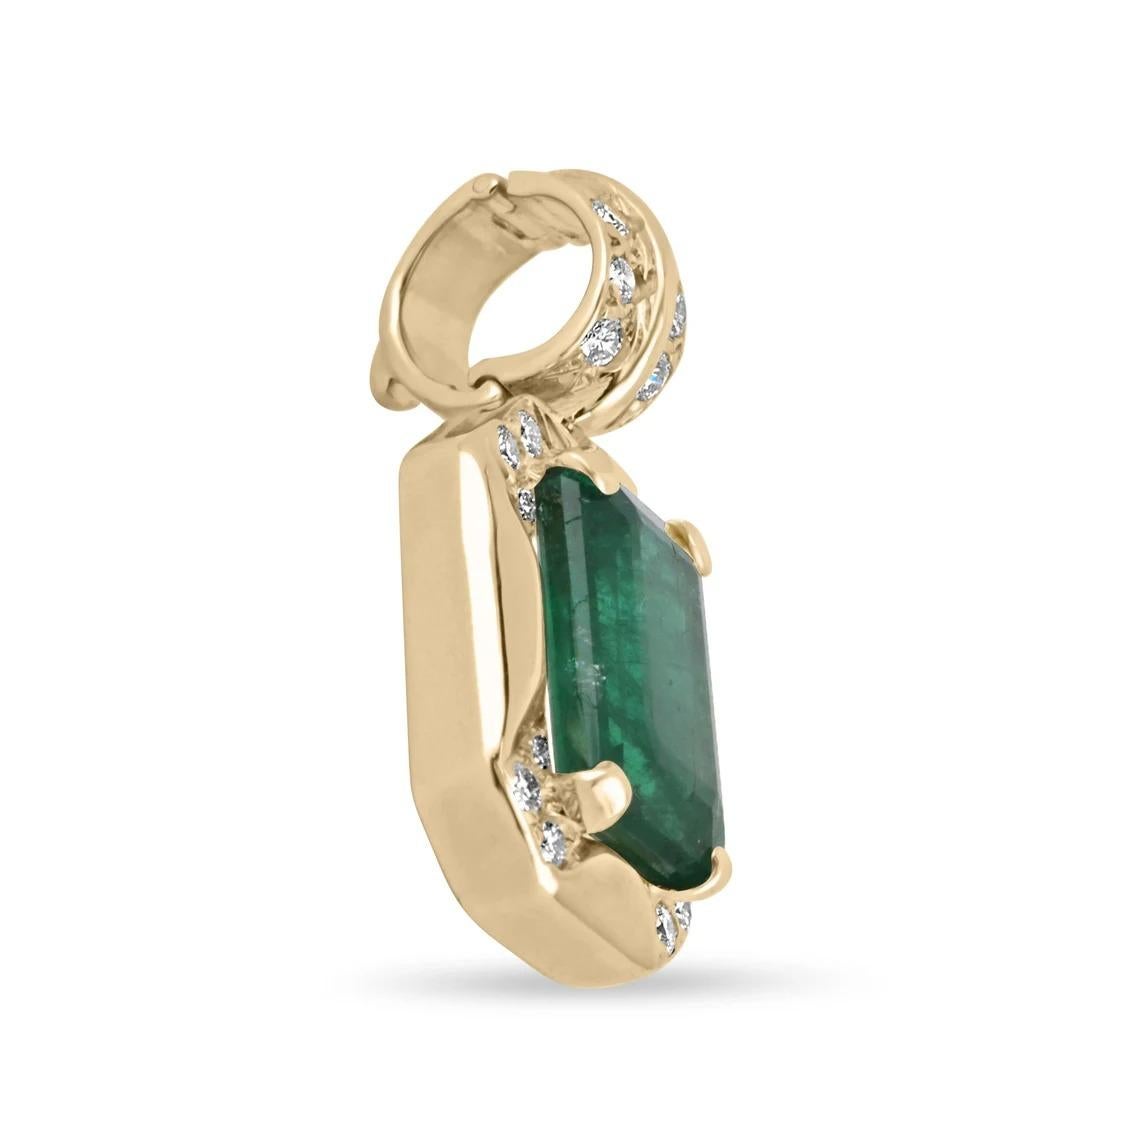 Captivate your eyes on this stunning, emerald and diamond pendant. The emerald has a full 4.55-carats of dark green color and very good luster. There are multiple other brilliant round-cut diamonds surrounding the center gem, as well as the bail.